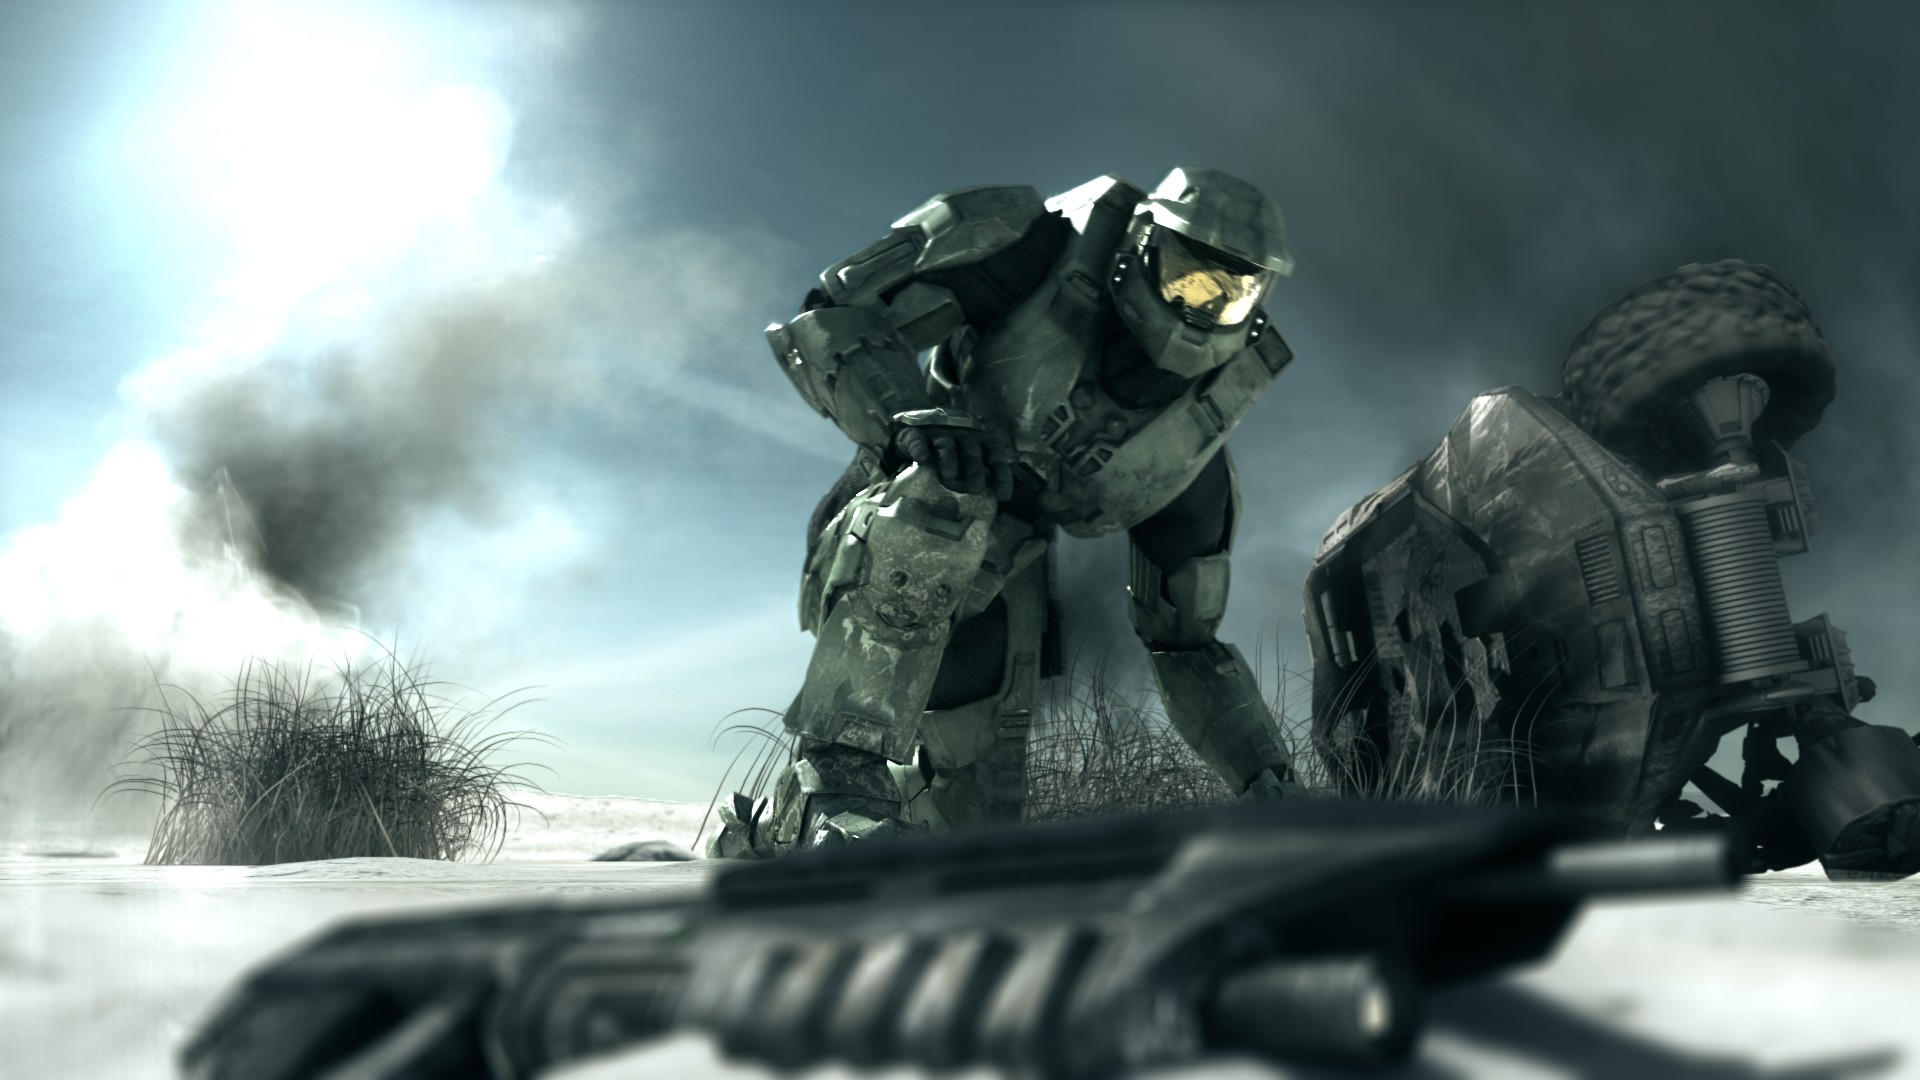 1920x1080 Halo-Wallpaper-5-by-mountwall-1 ?